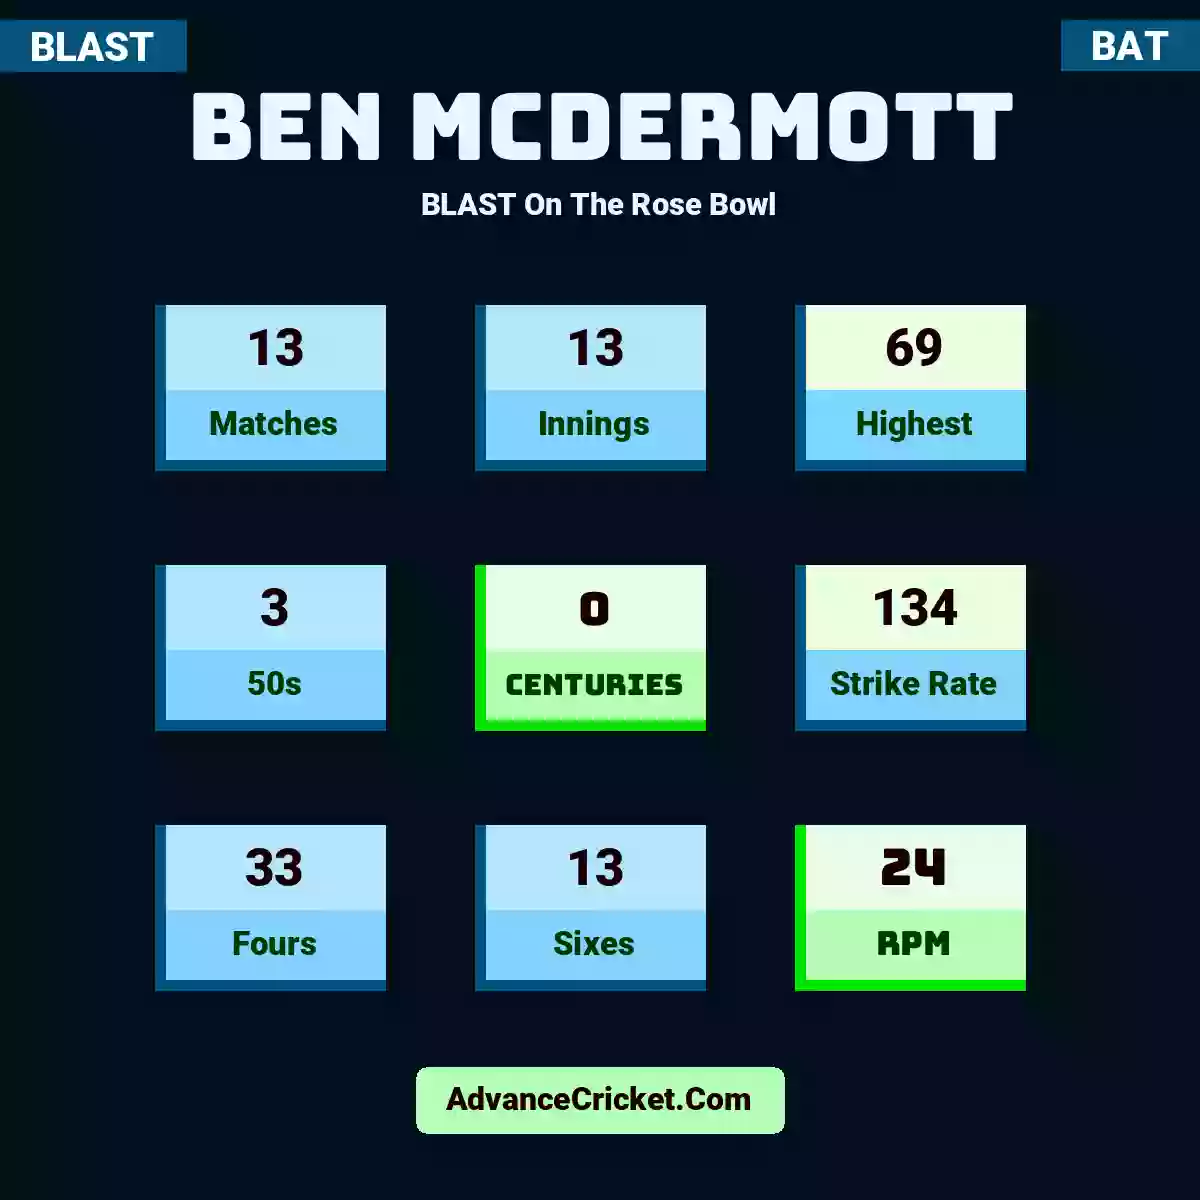 Ben McDermott BLAST  On The Rose Bowl, Ben McDermott played 13 matches, scored 69 runs as highest, 3 half-centuries, and 0 centuries, with a strike rate of 134. B.McDermott hit 33 fours and 13 sixes, with an RPM of 24.